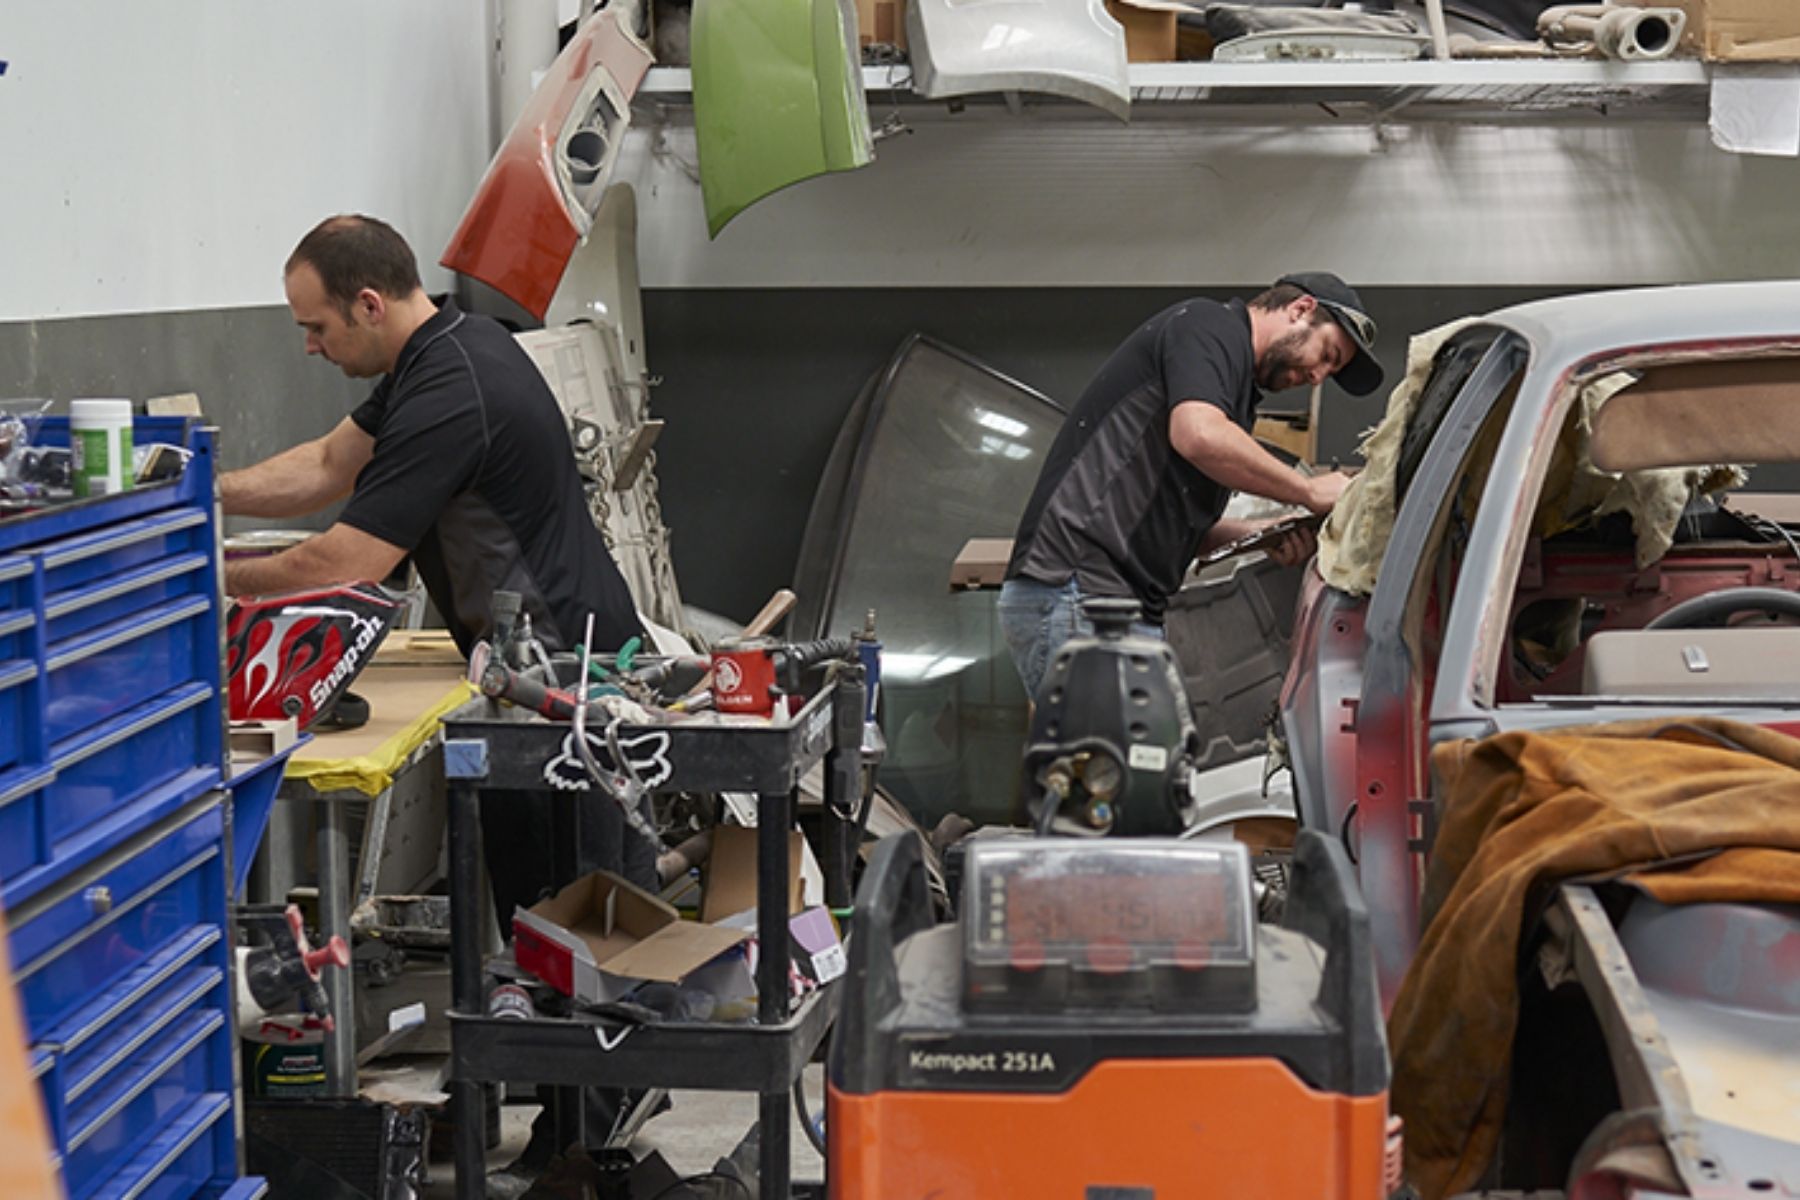 Photo of mechanics at work in a workshop, surrounded by equipment and tools.